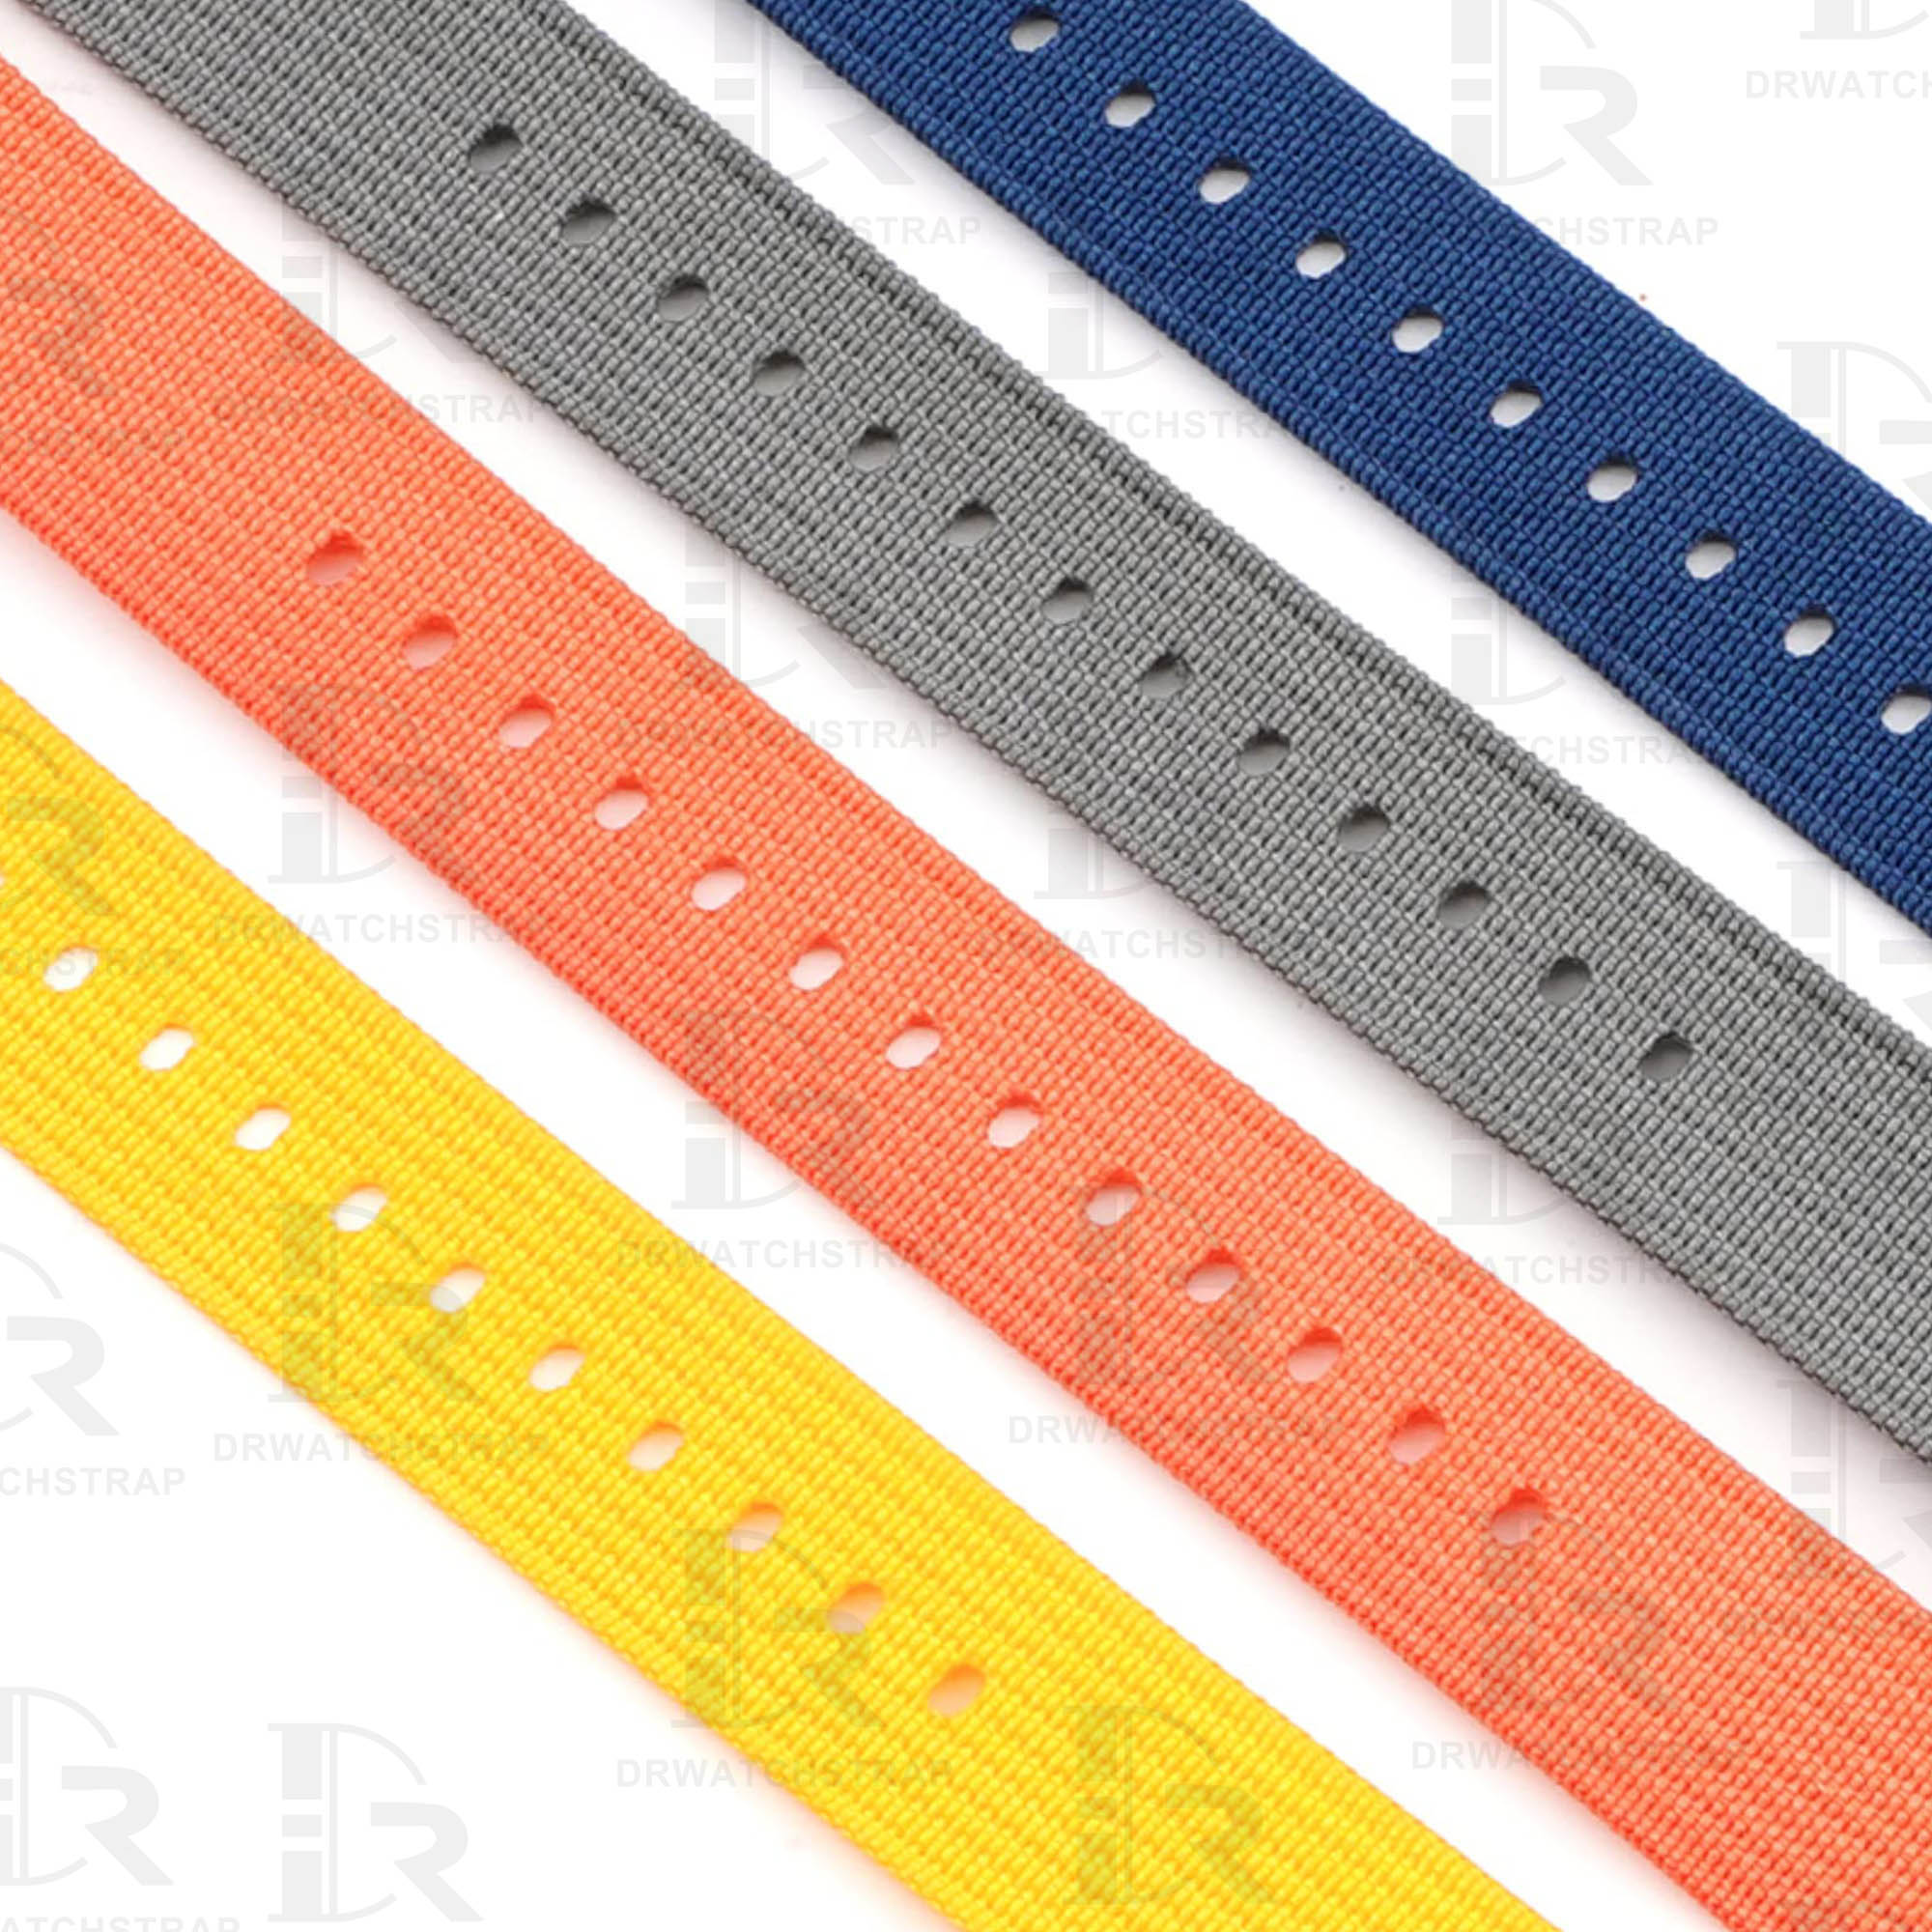 Buy Omega and swatch Moonswatch Nato strap 20mm Yellow watch band (2)